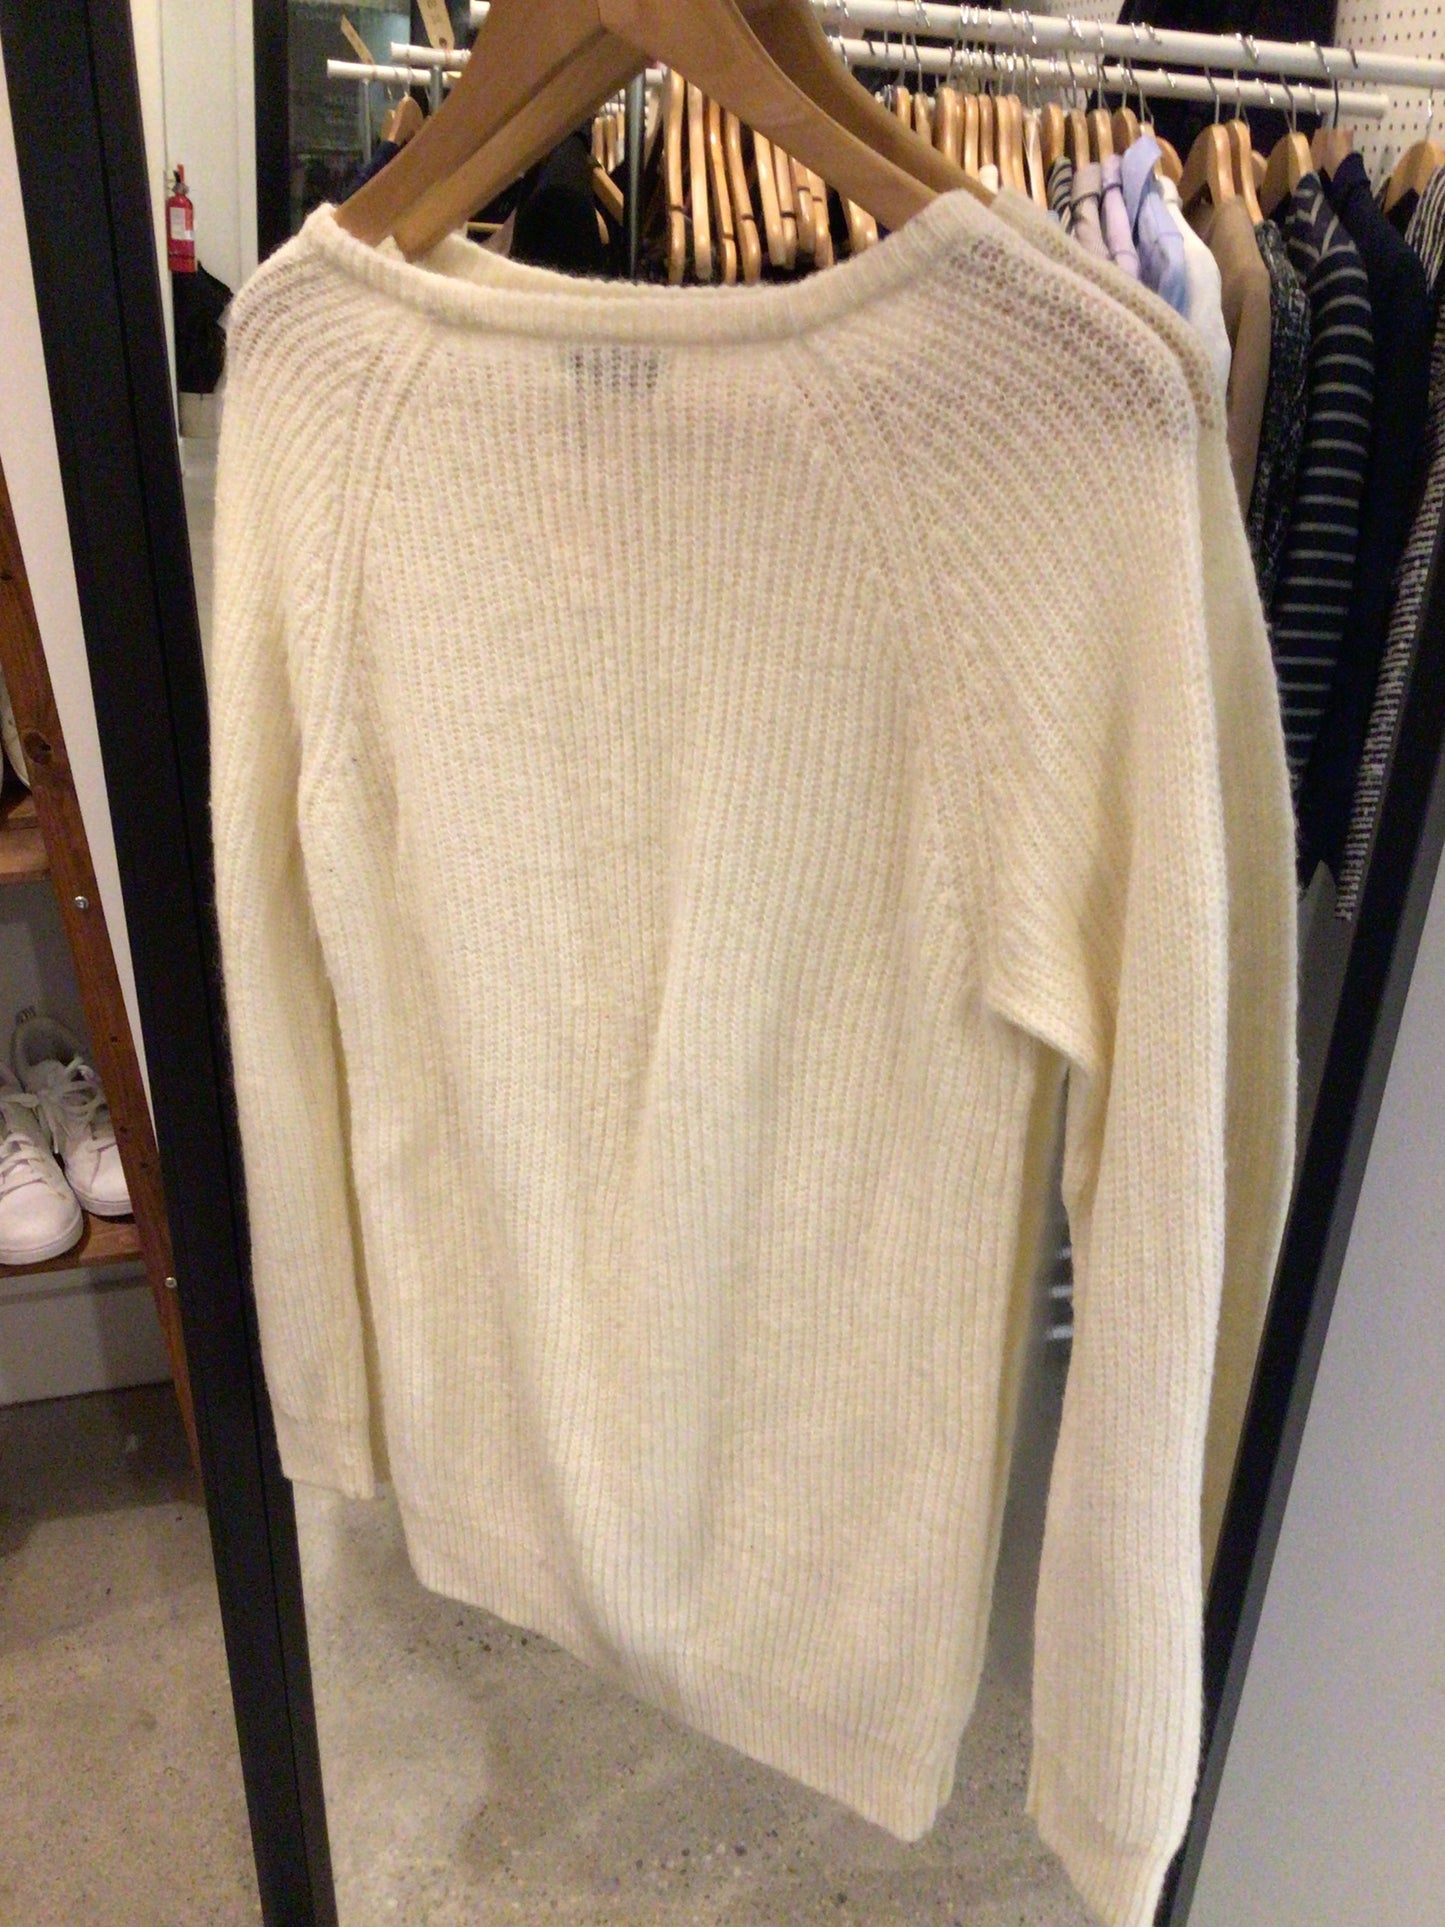 Consignment 4581-01 TnA cream sweater. Size med.